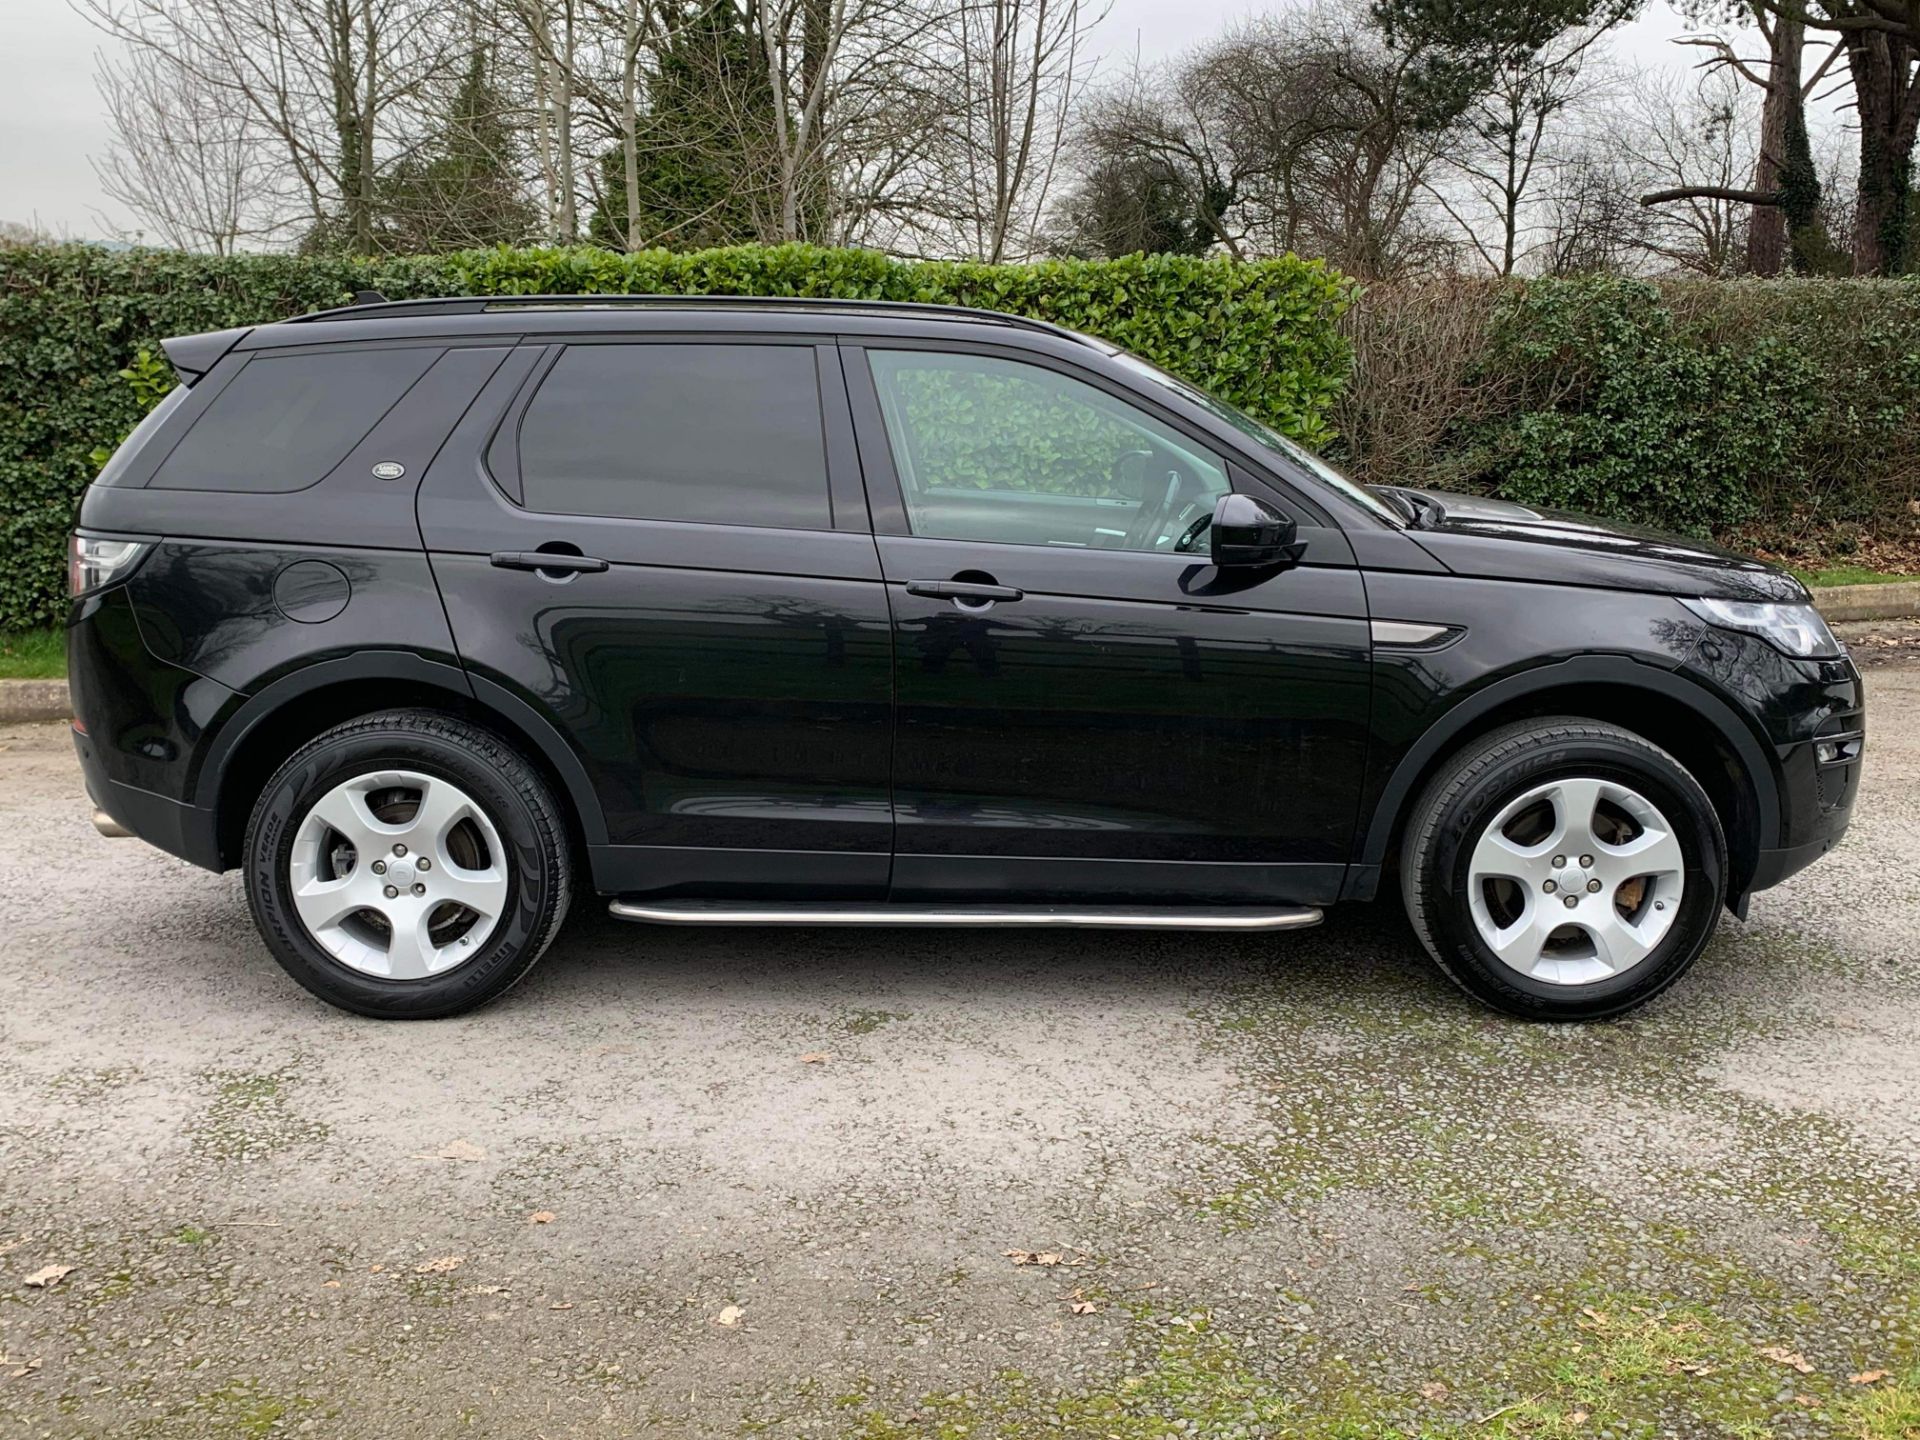 LAND ROVER DISCOVERY SPORT 2.0 TD4 SE TECH 150 S/S - Image 8 of 10